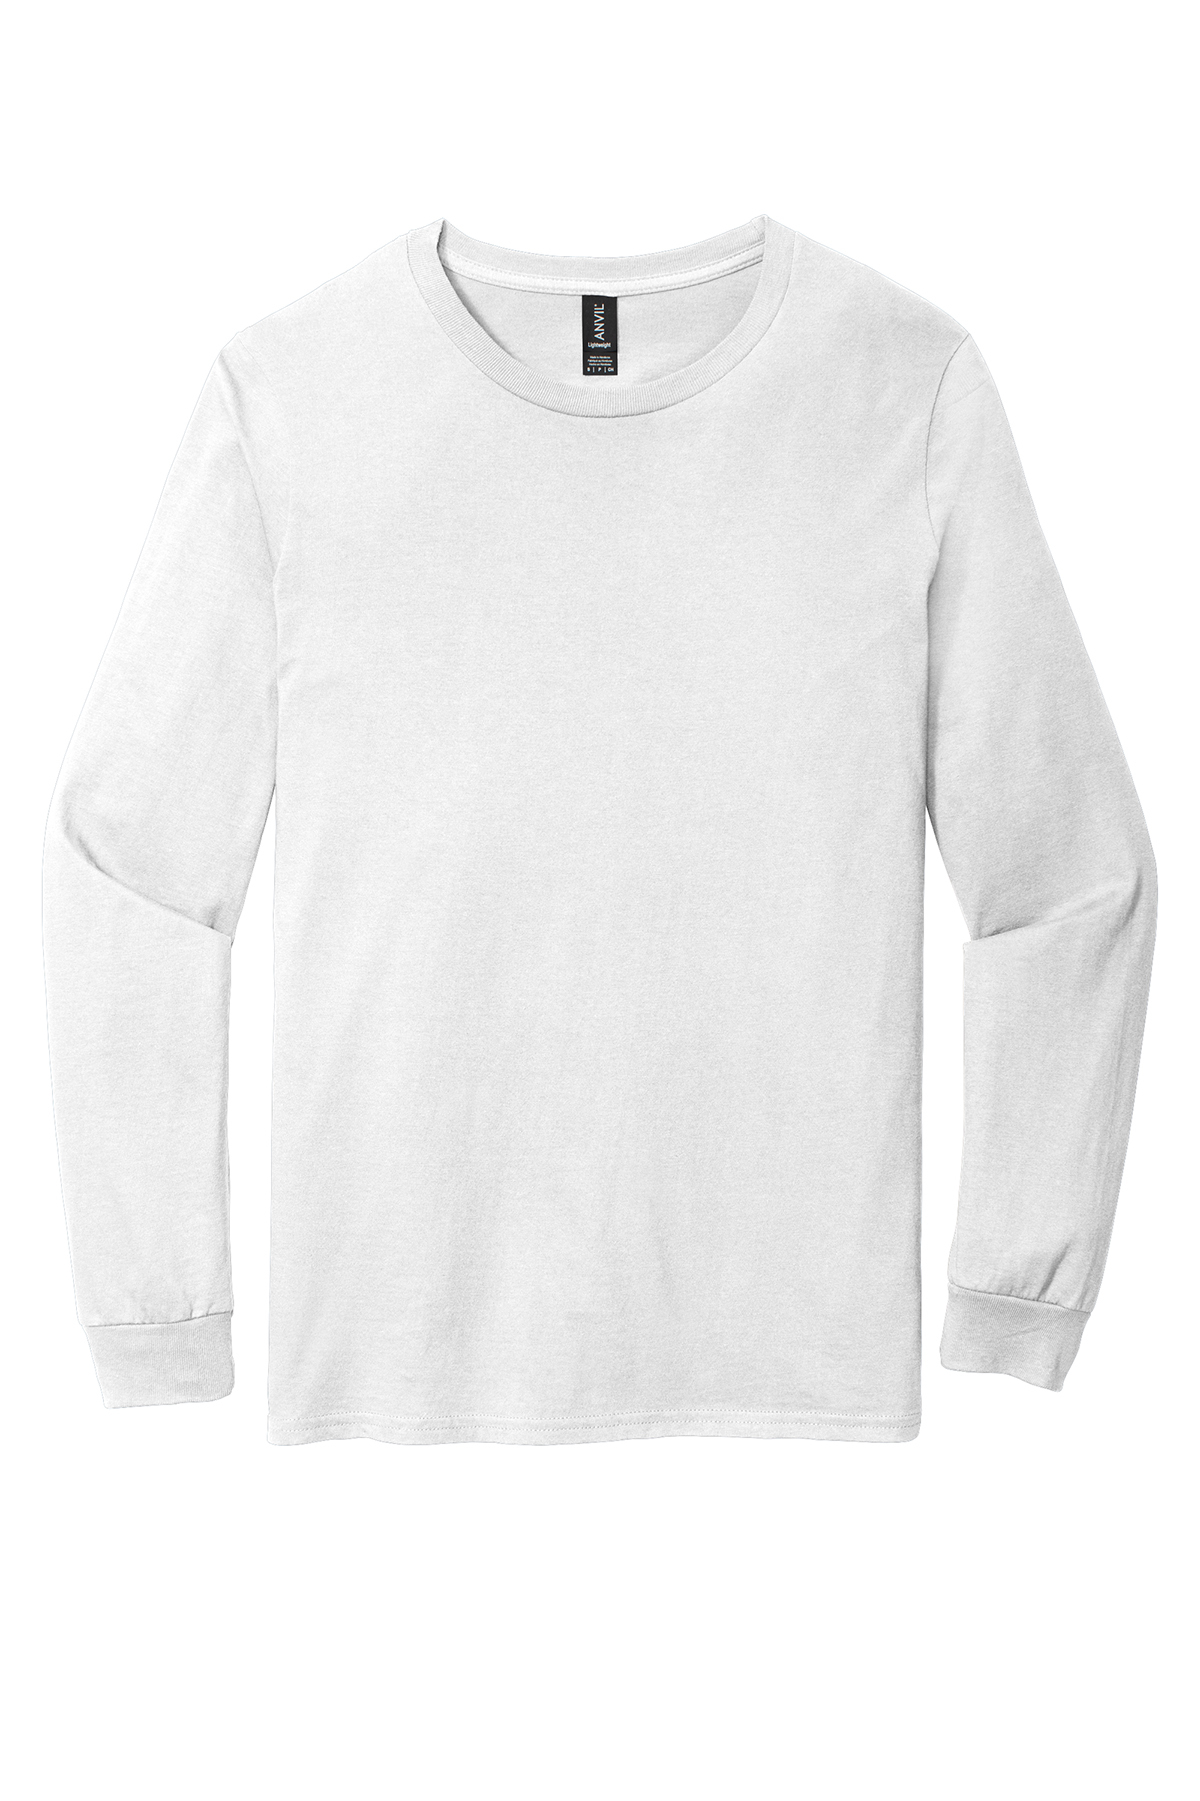 Anvil 100% Combed Ring Spun Cotton Long Sleeve T-Shirt | Product | SanMar